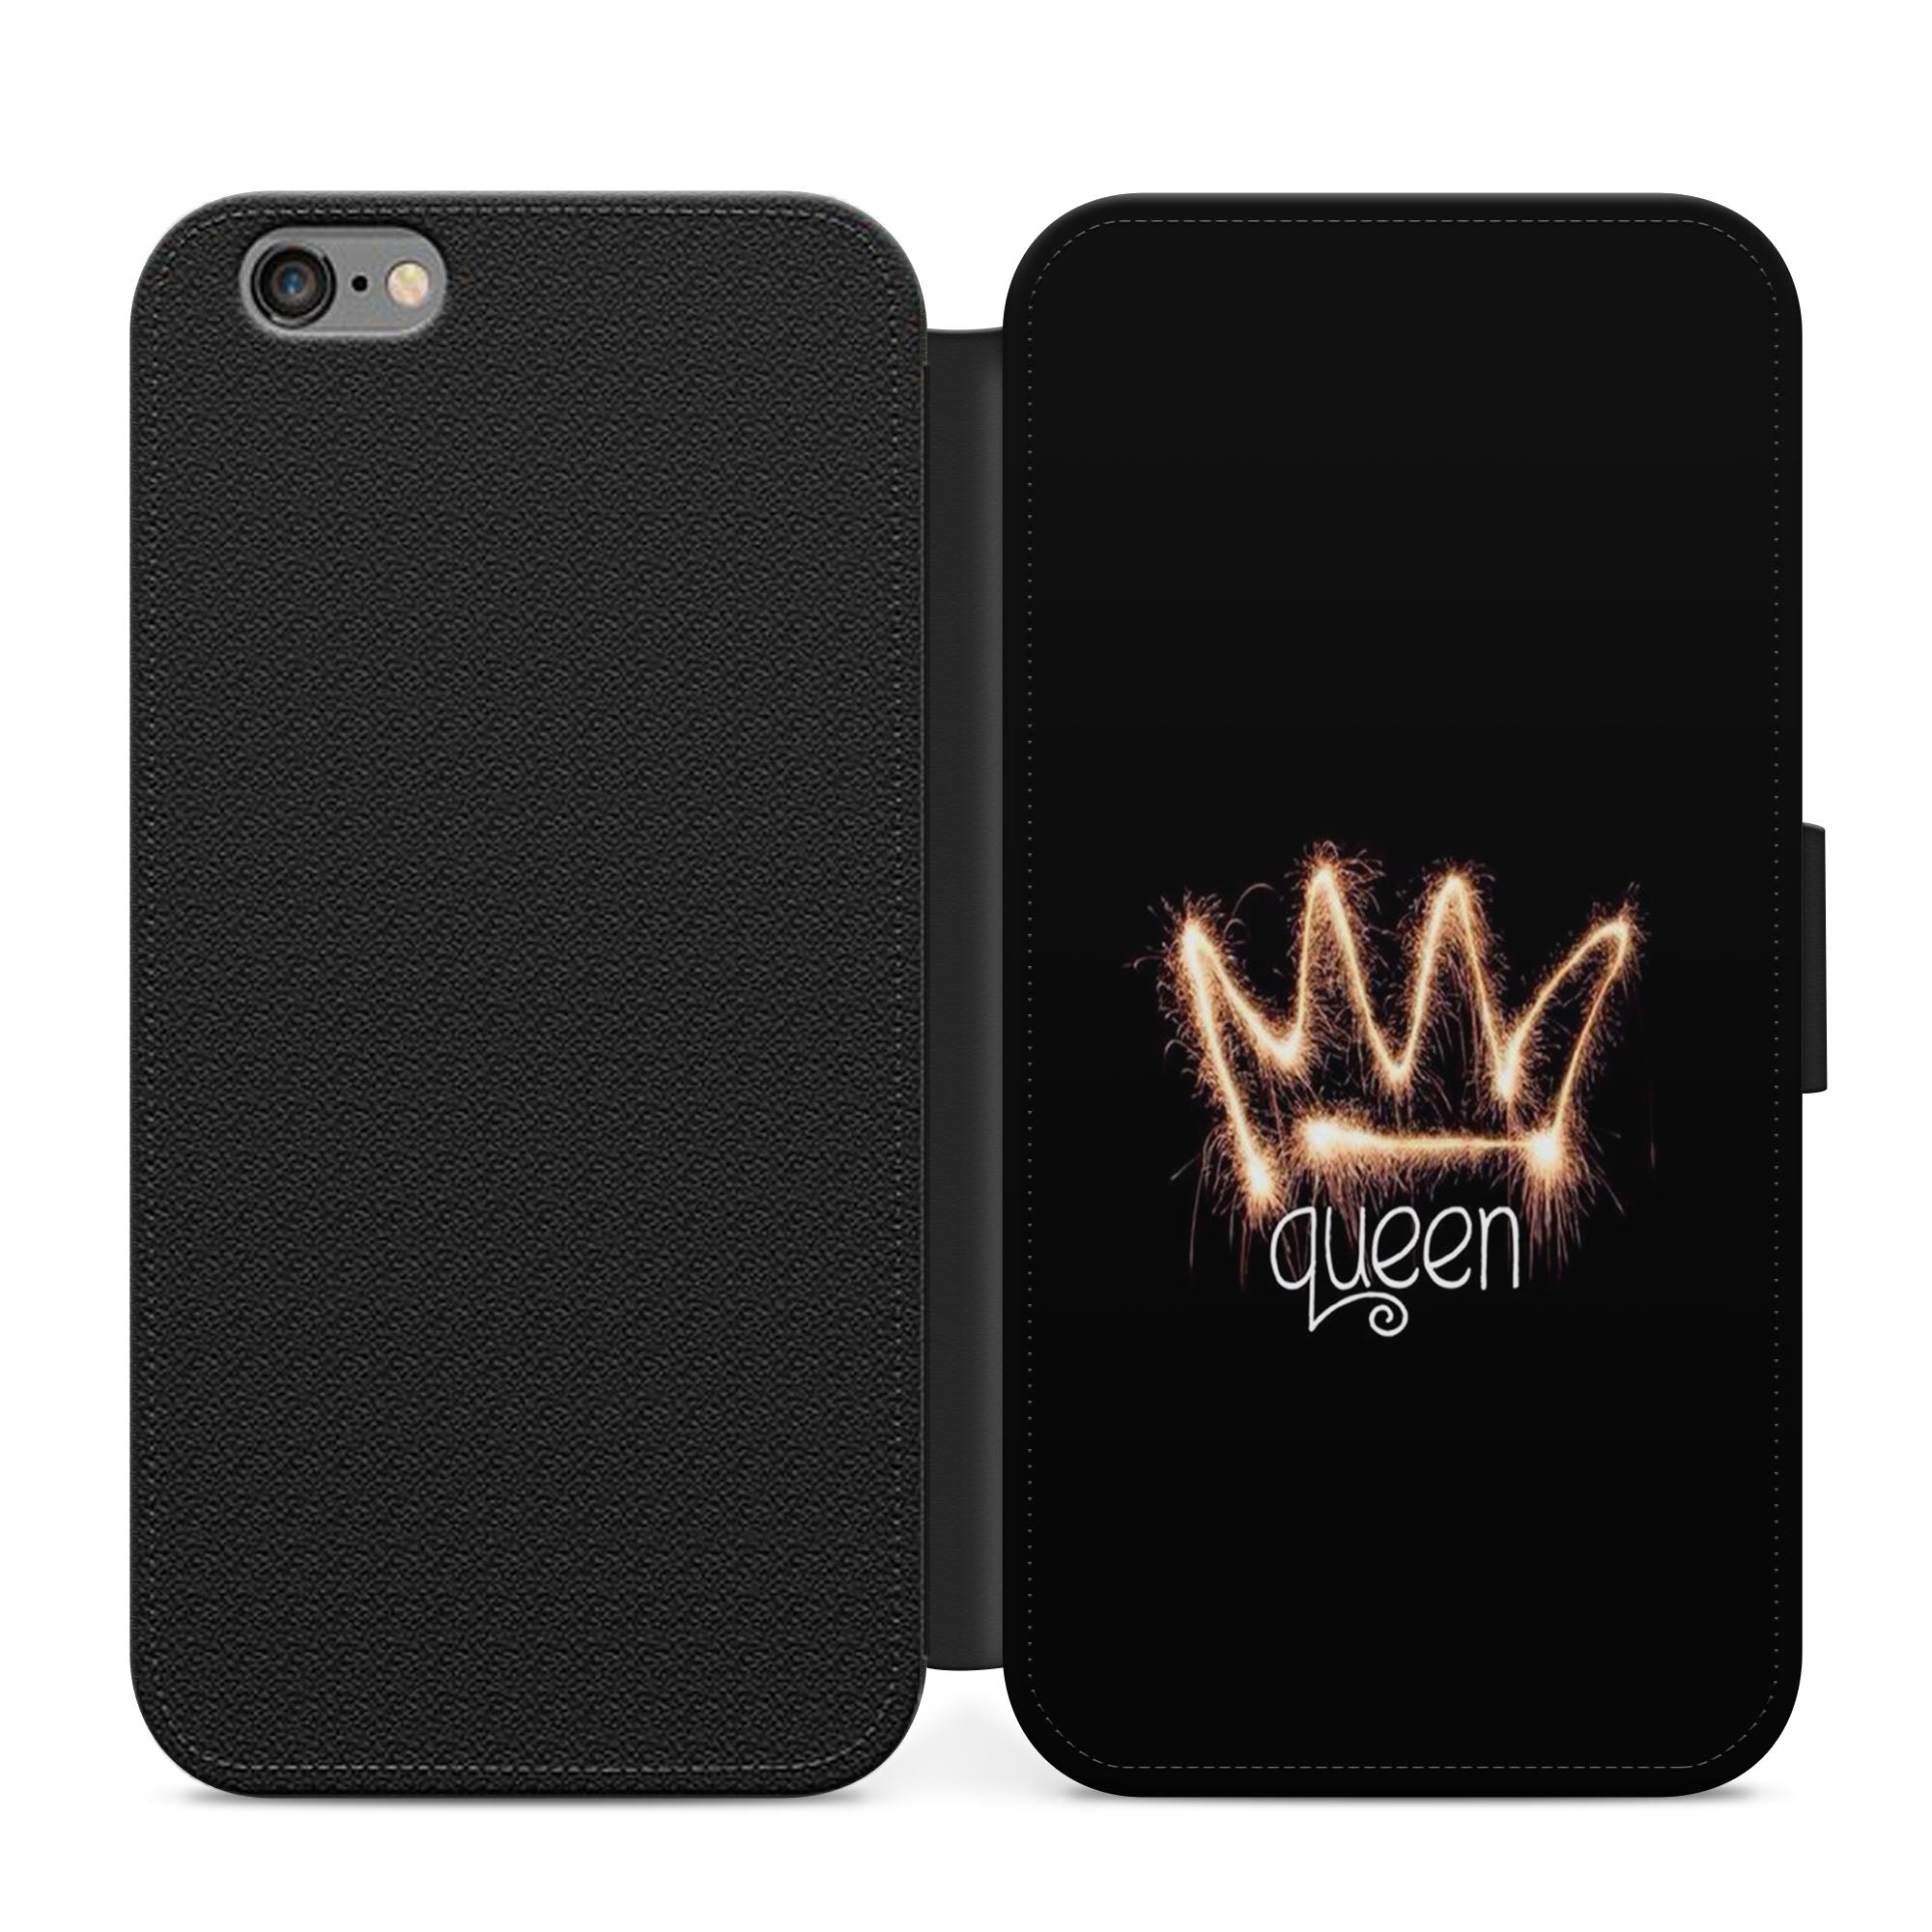 I'm A Queen Faux Leather Flip Case Wallet for iPhone / Samsung